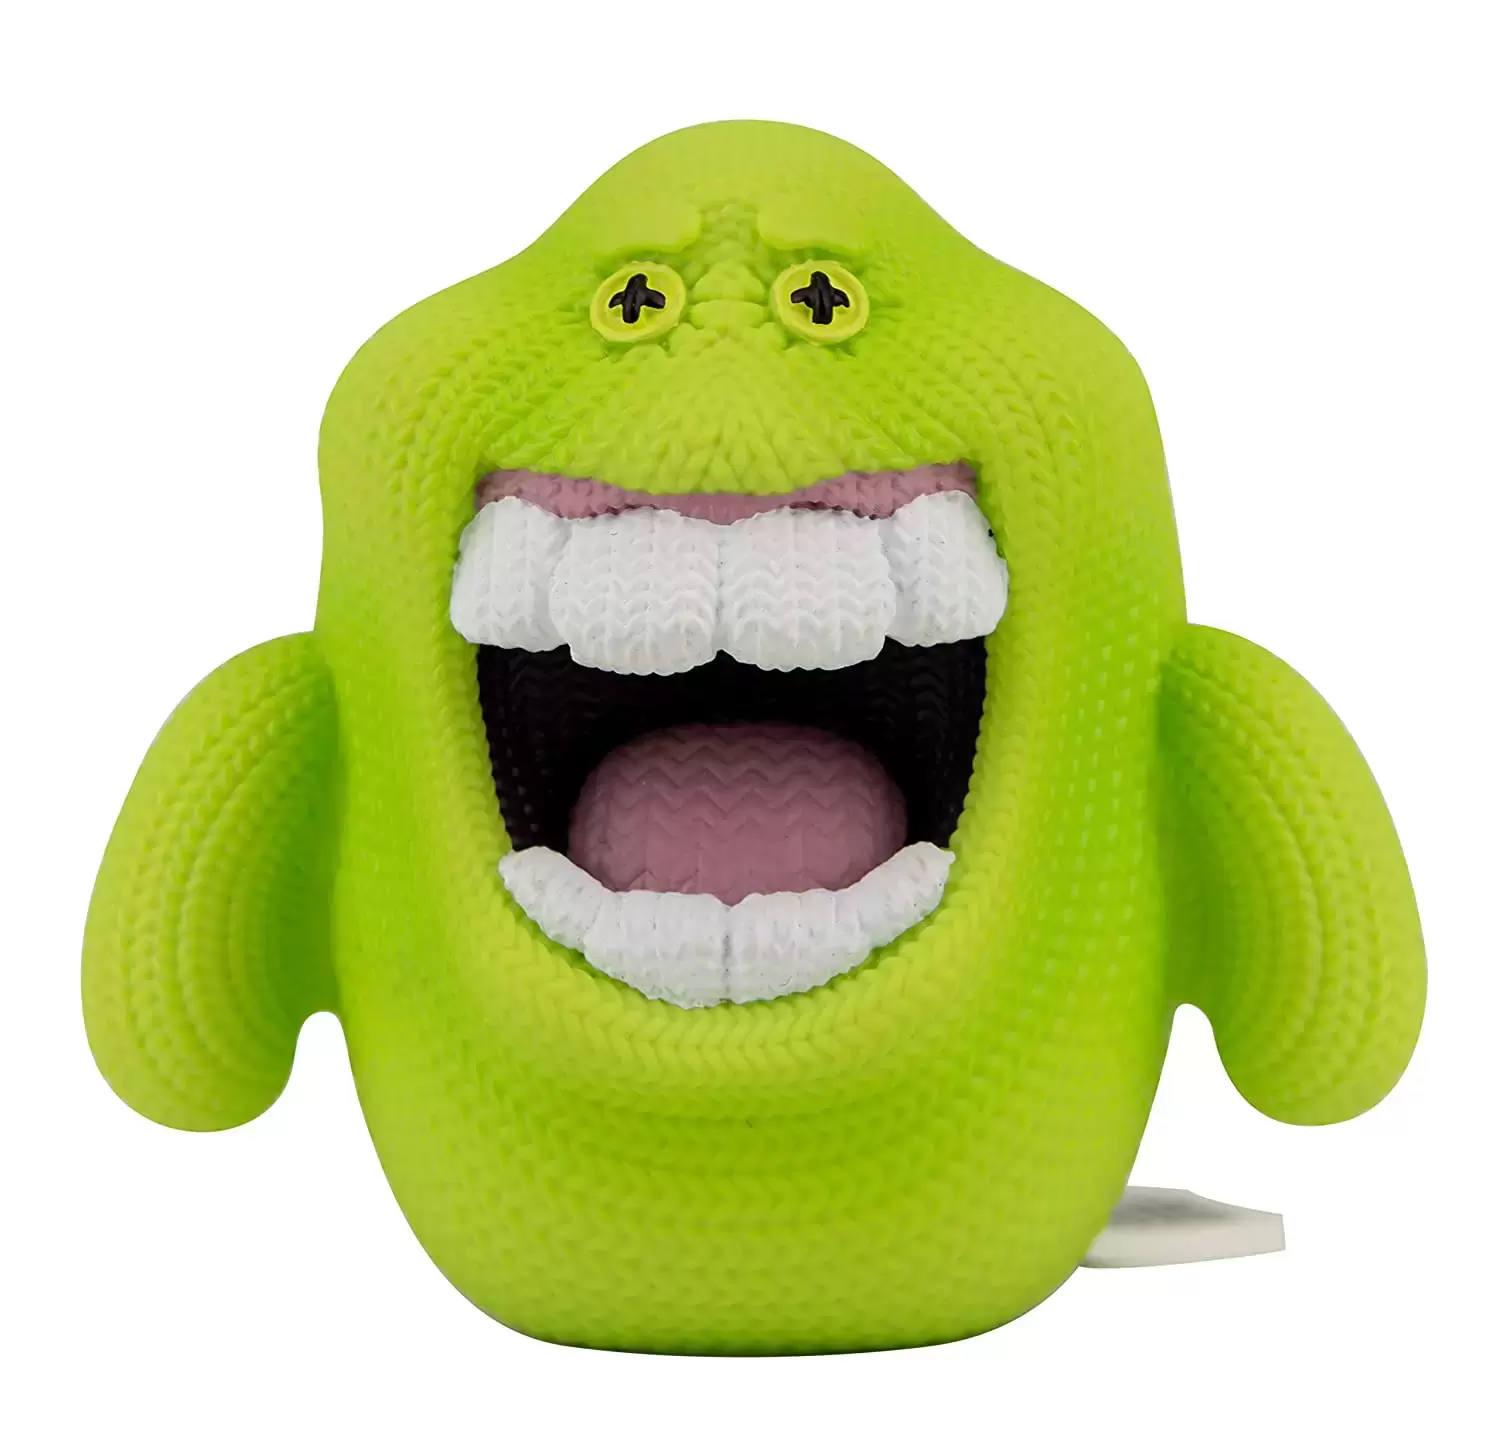 Handmade By Robots - Ghostbusters - Slimer